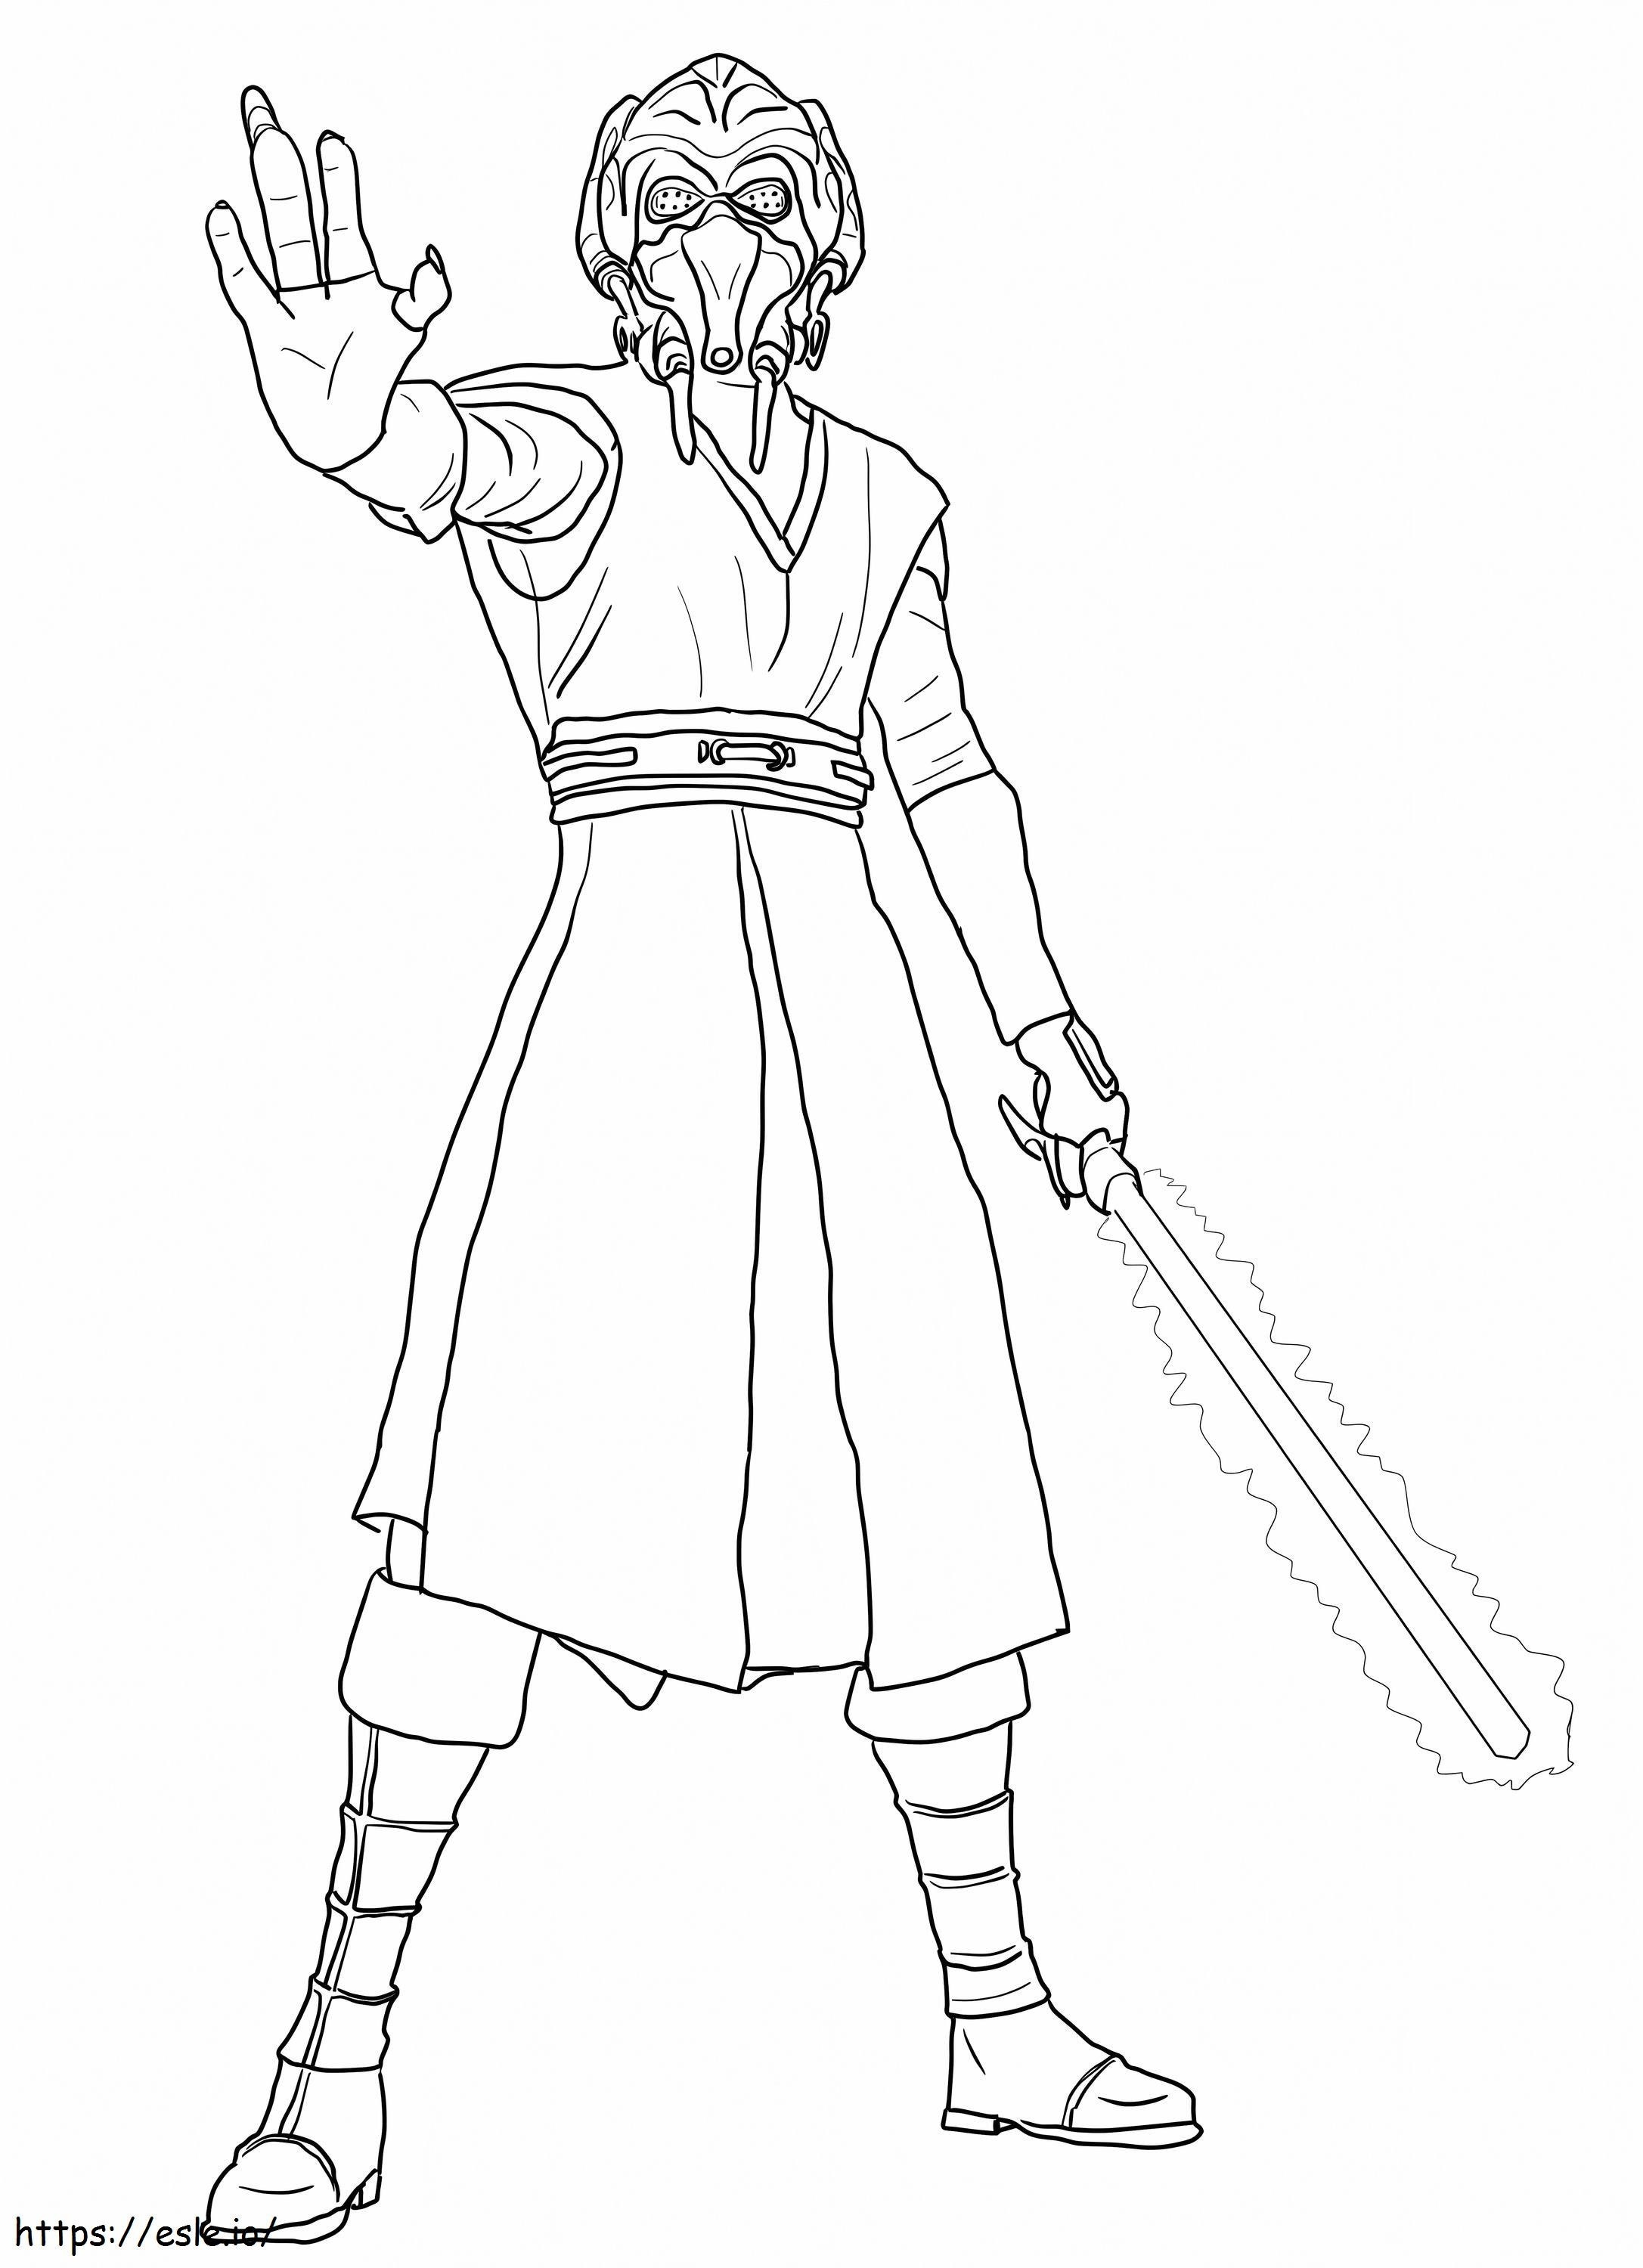 Plo Koon coloring page